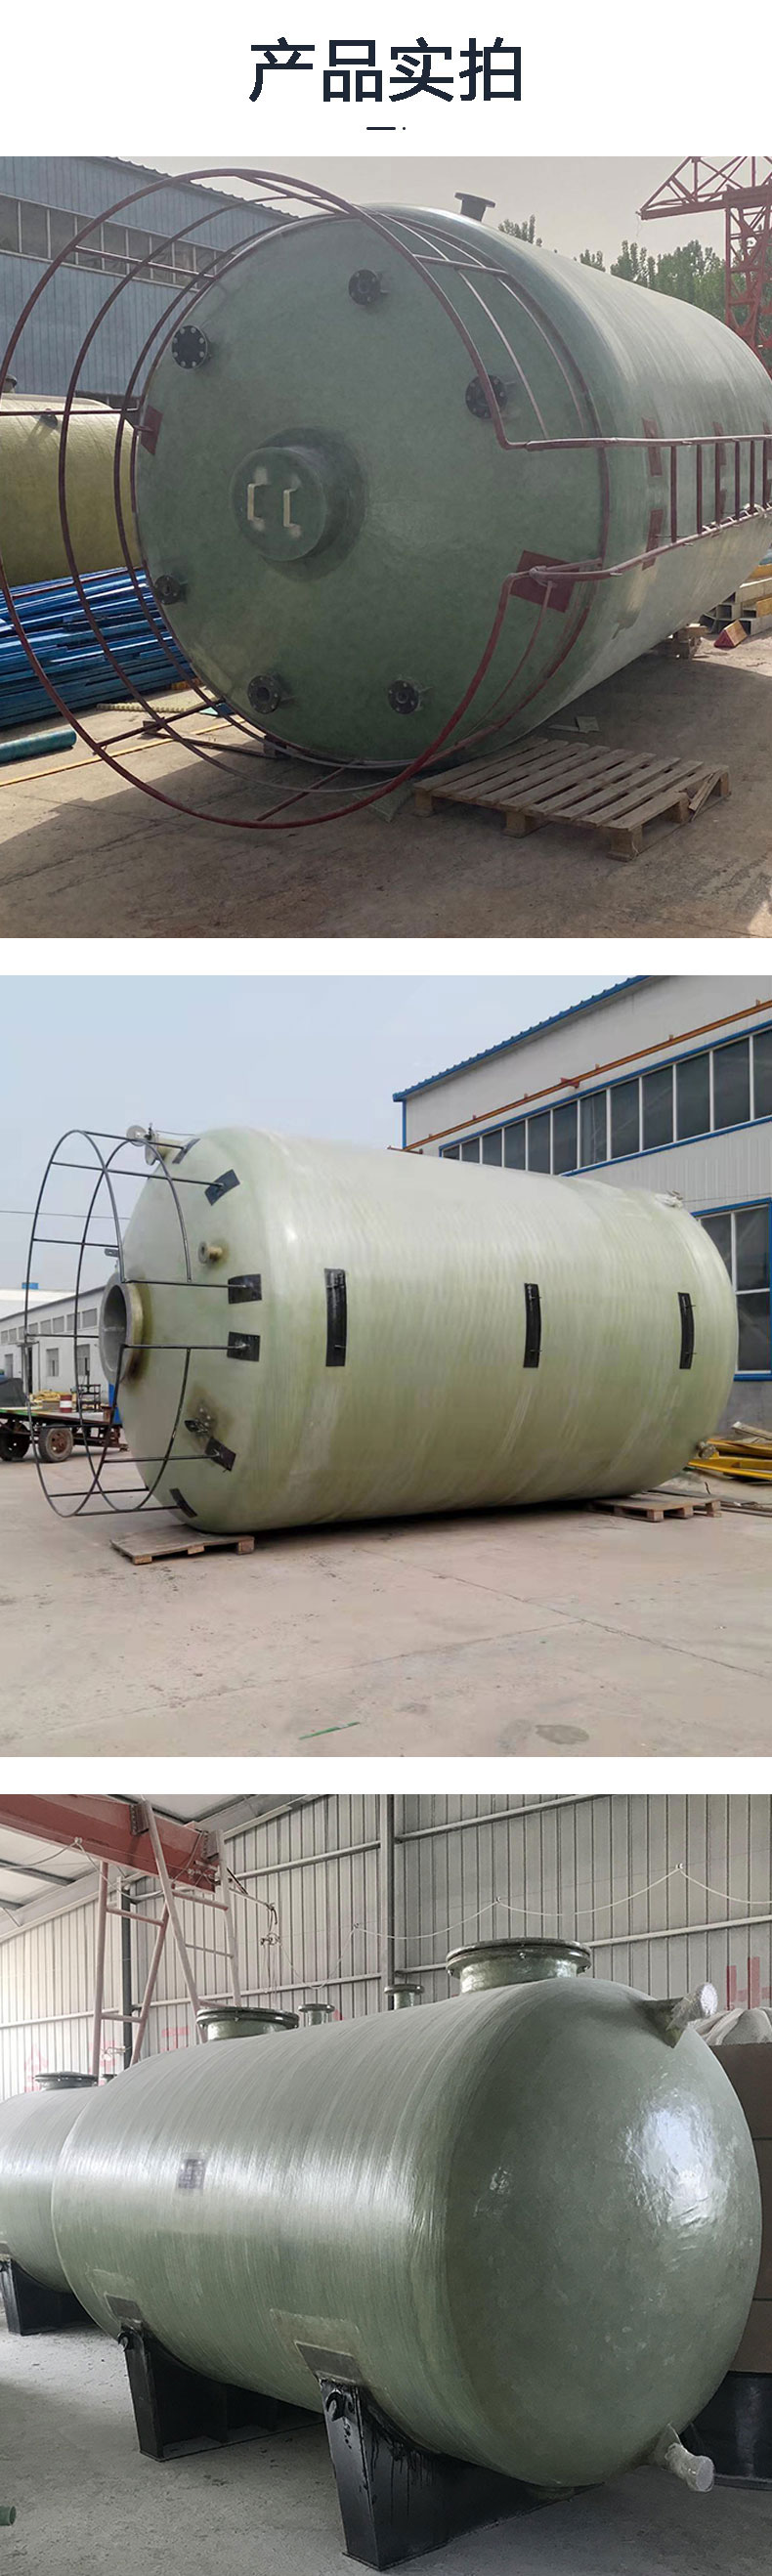 Glass fiber reinforced plastic storage tank series vertical hydrochloric acid tank dilute sulfuric acid nitric acid mixing tank horizontal chemical large container tank